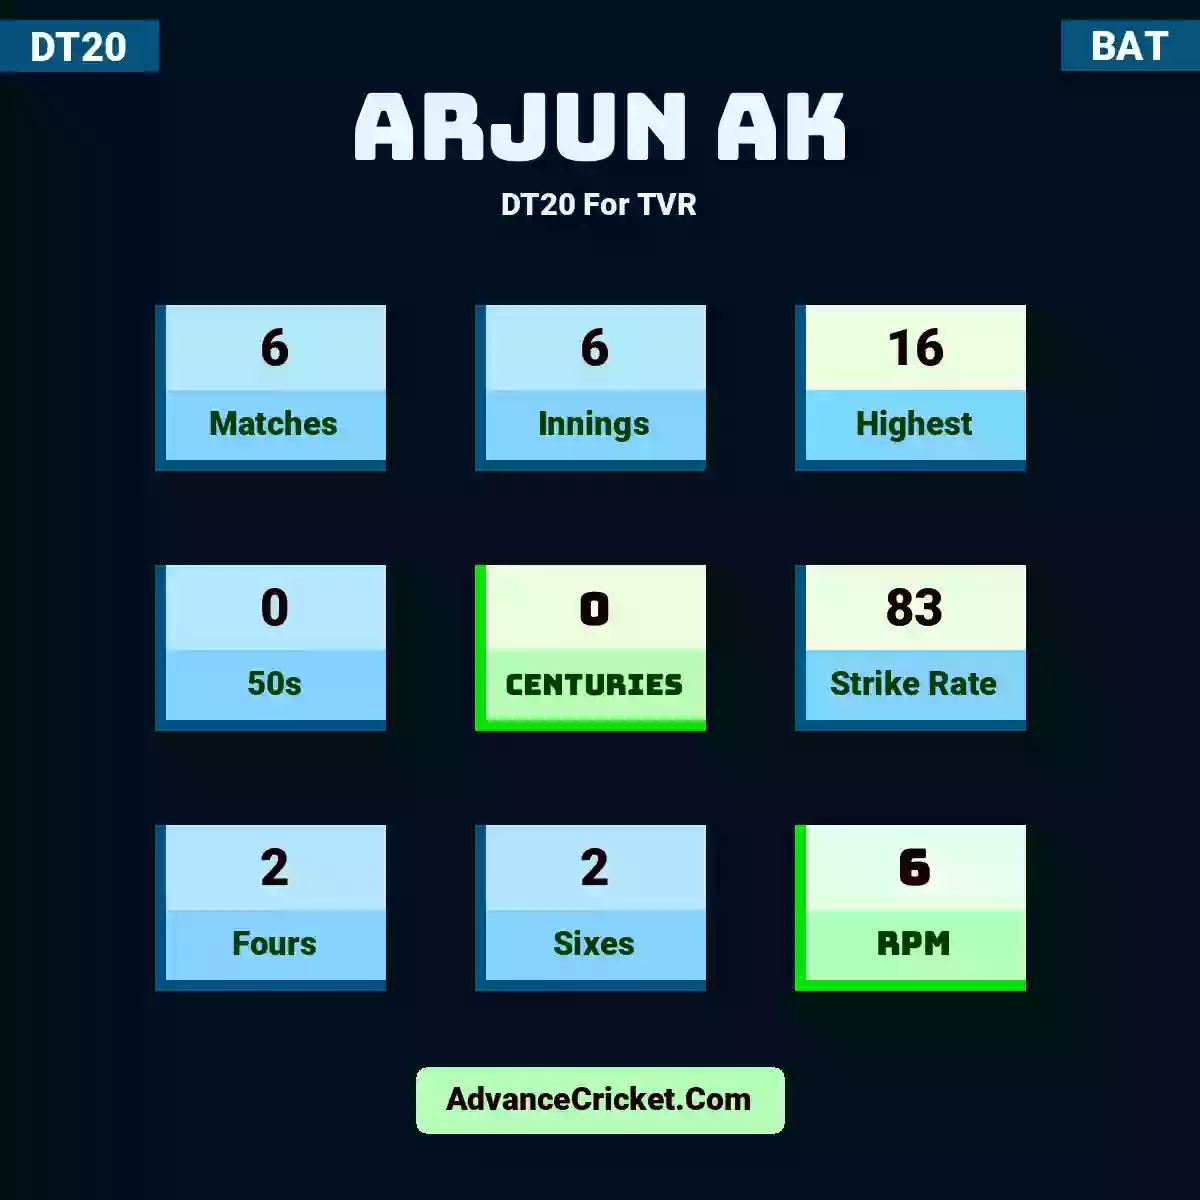 Arjun AK DT20  For TVR, Arjun AK played 6 matches, scored 16 runs as highest, 0 half-centuries, and 0 centuries, with a strike rate of 83. A.AK hit 2 fours and 2 sixes, with an RPM of 6.